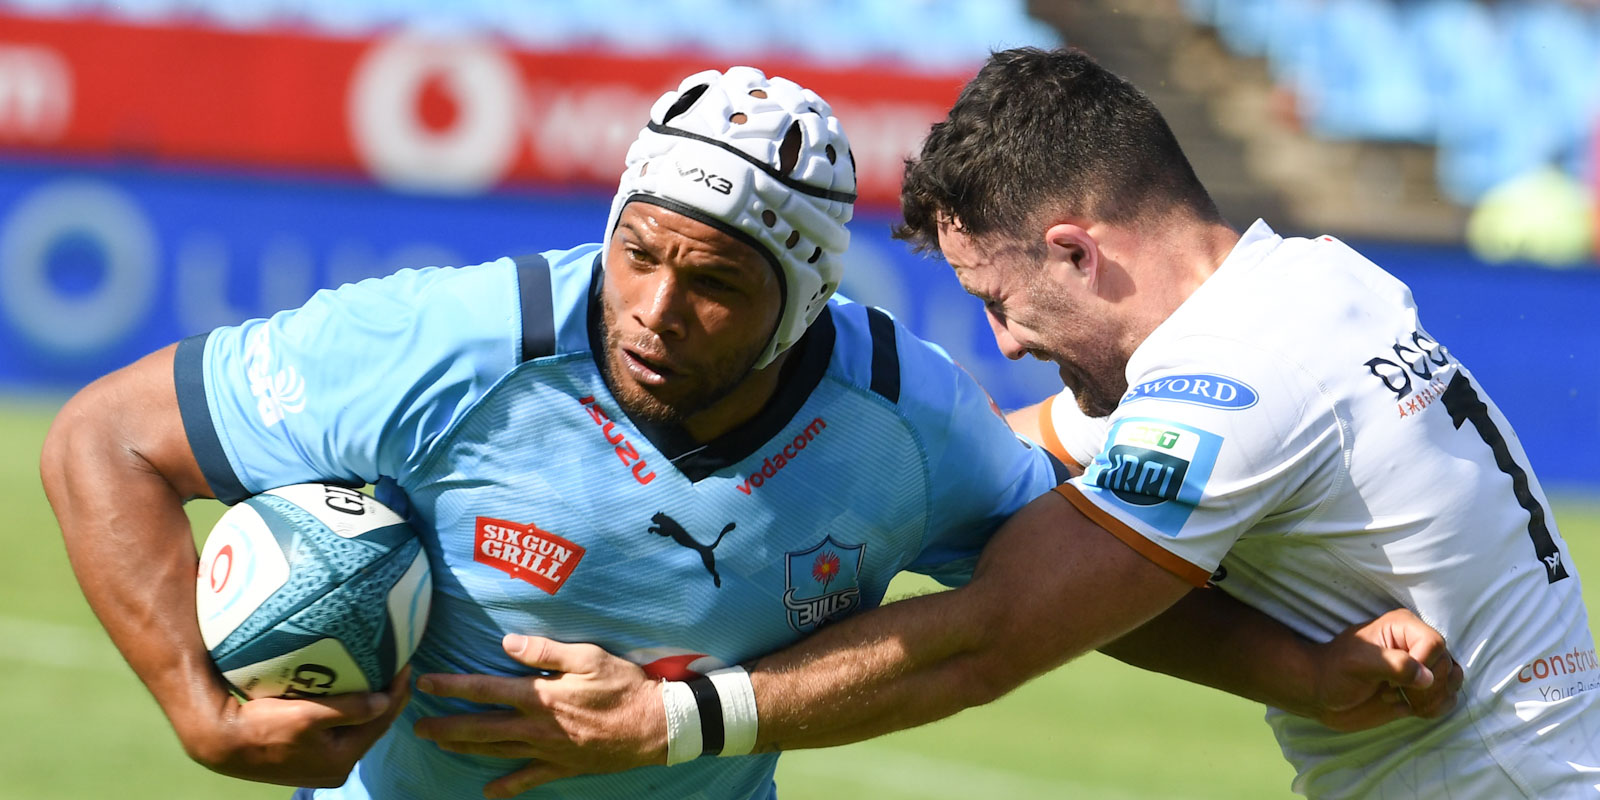 PRETORIA, SOUTH AFRICA - NOVEMBER 26: Nizaam Carr of the Bulls during the United Rugby Championship match between Vodacom Bulls and Ospreys at Loftus Versfeld on November 26, 2022 in Pretoria, South Africa. (Photo by Lee Warren/Gallo Images)